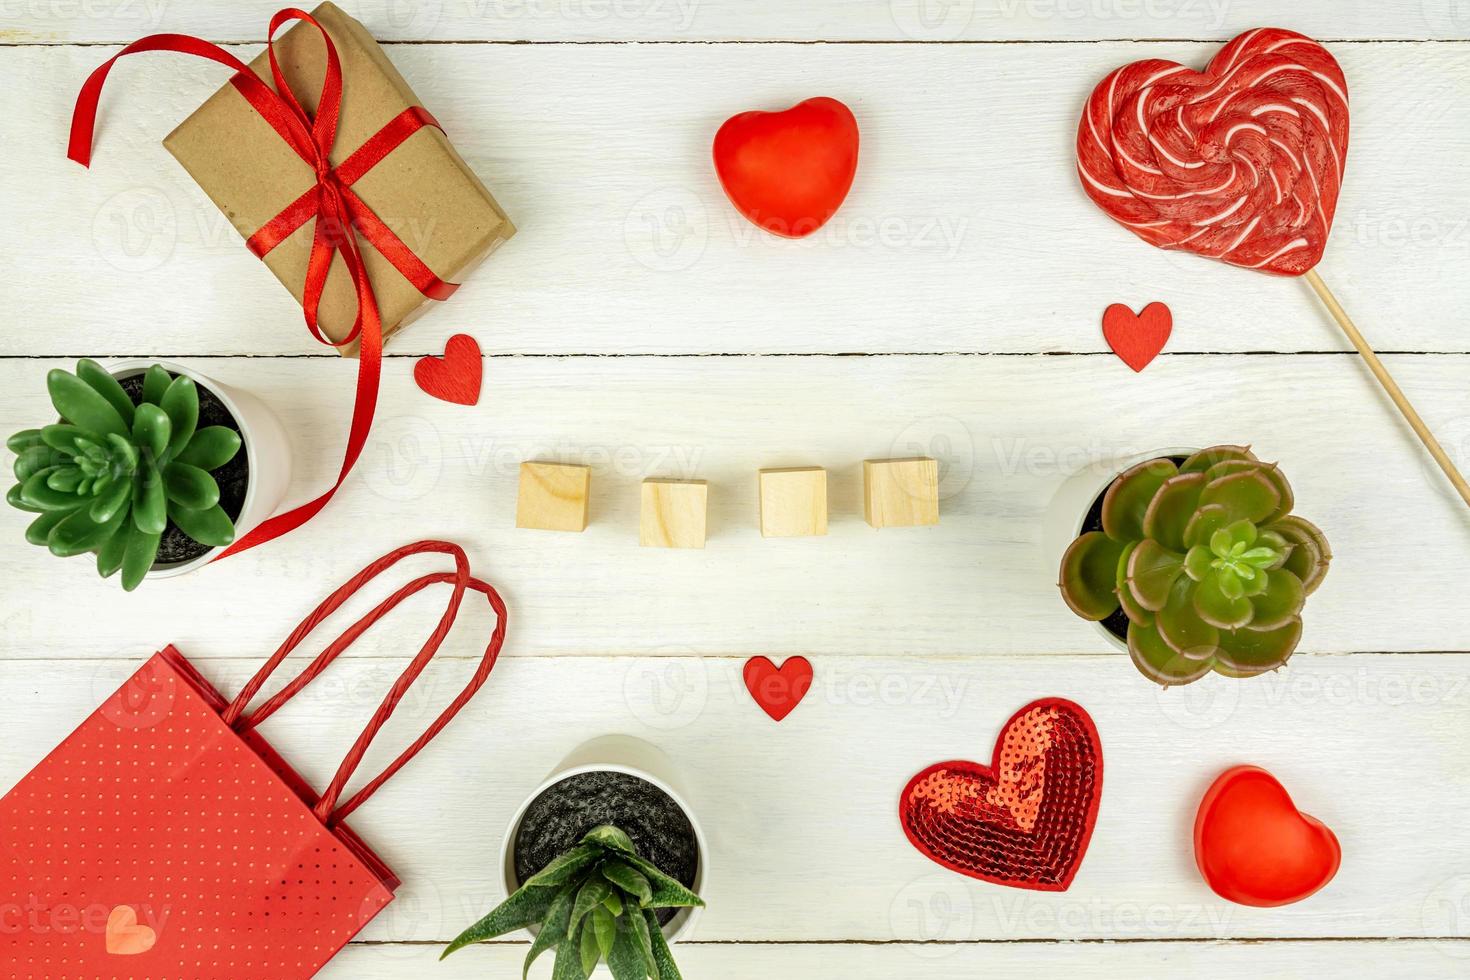 Creative Valentine Day romantic composition with red hearts, satin ribbon, lollipop, gift box and paper bag on white background. Mockup with empty wooden cubes for text. photo